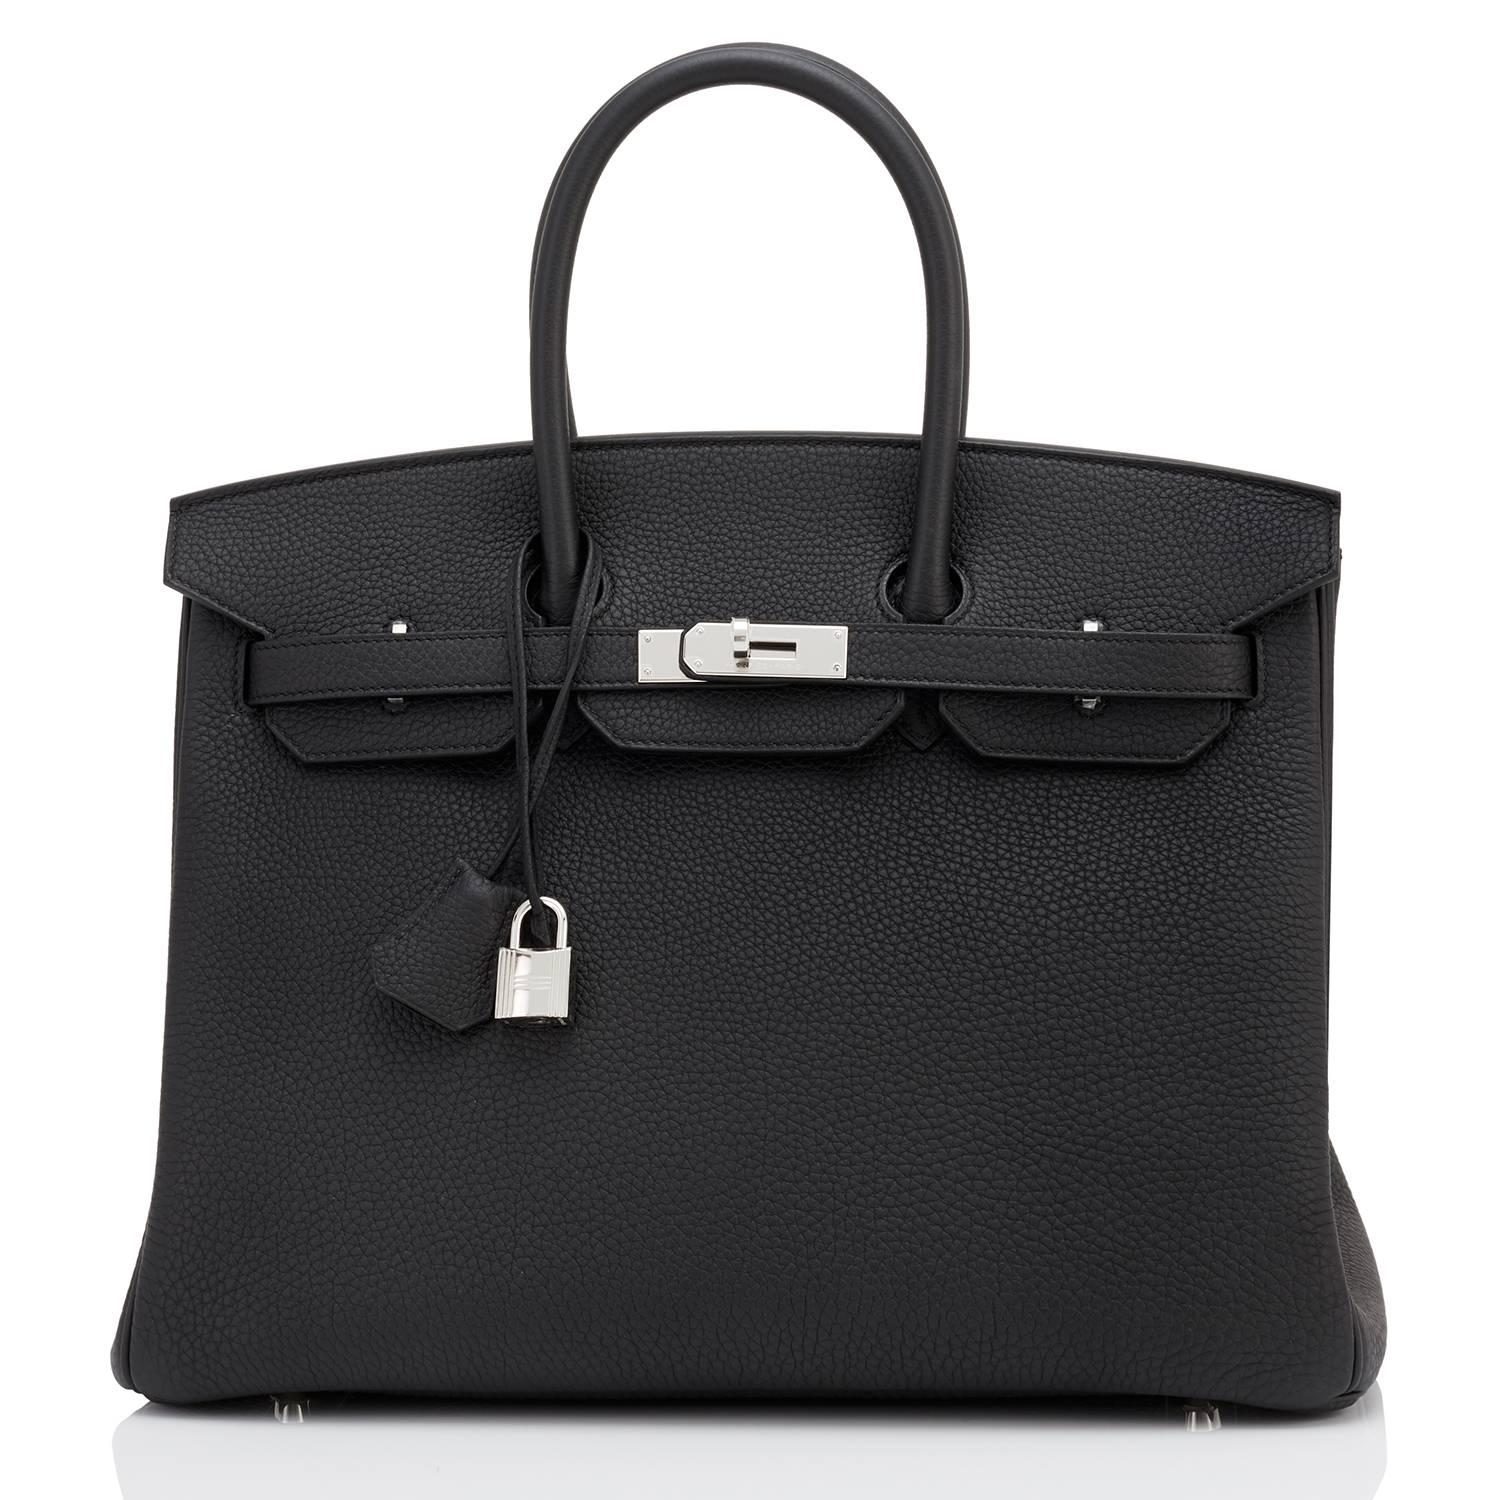 Hermes Birkin 35cm Black Togo Palladium Hardware Bag U Stamp, 2022
Just purchased from Hermes store; bag bears new 2022 interior U Stamp.
Store Fresh. Brand New in Box. Pristine Condition (with plastic on hardware)
Perfect gift! Comes with lock,